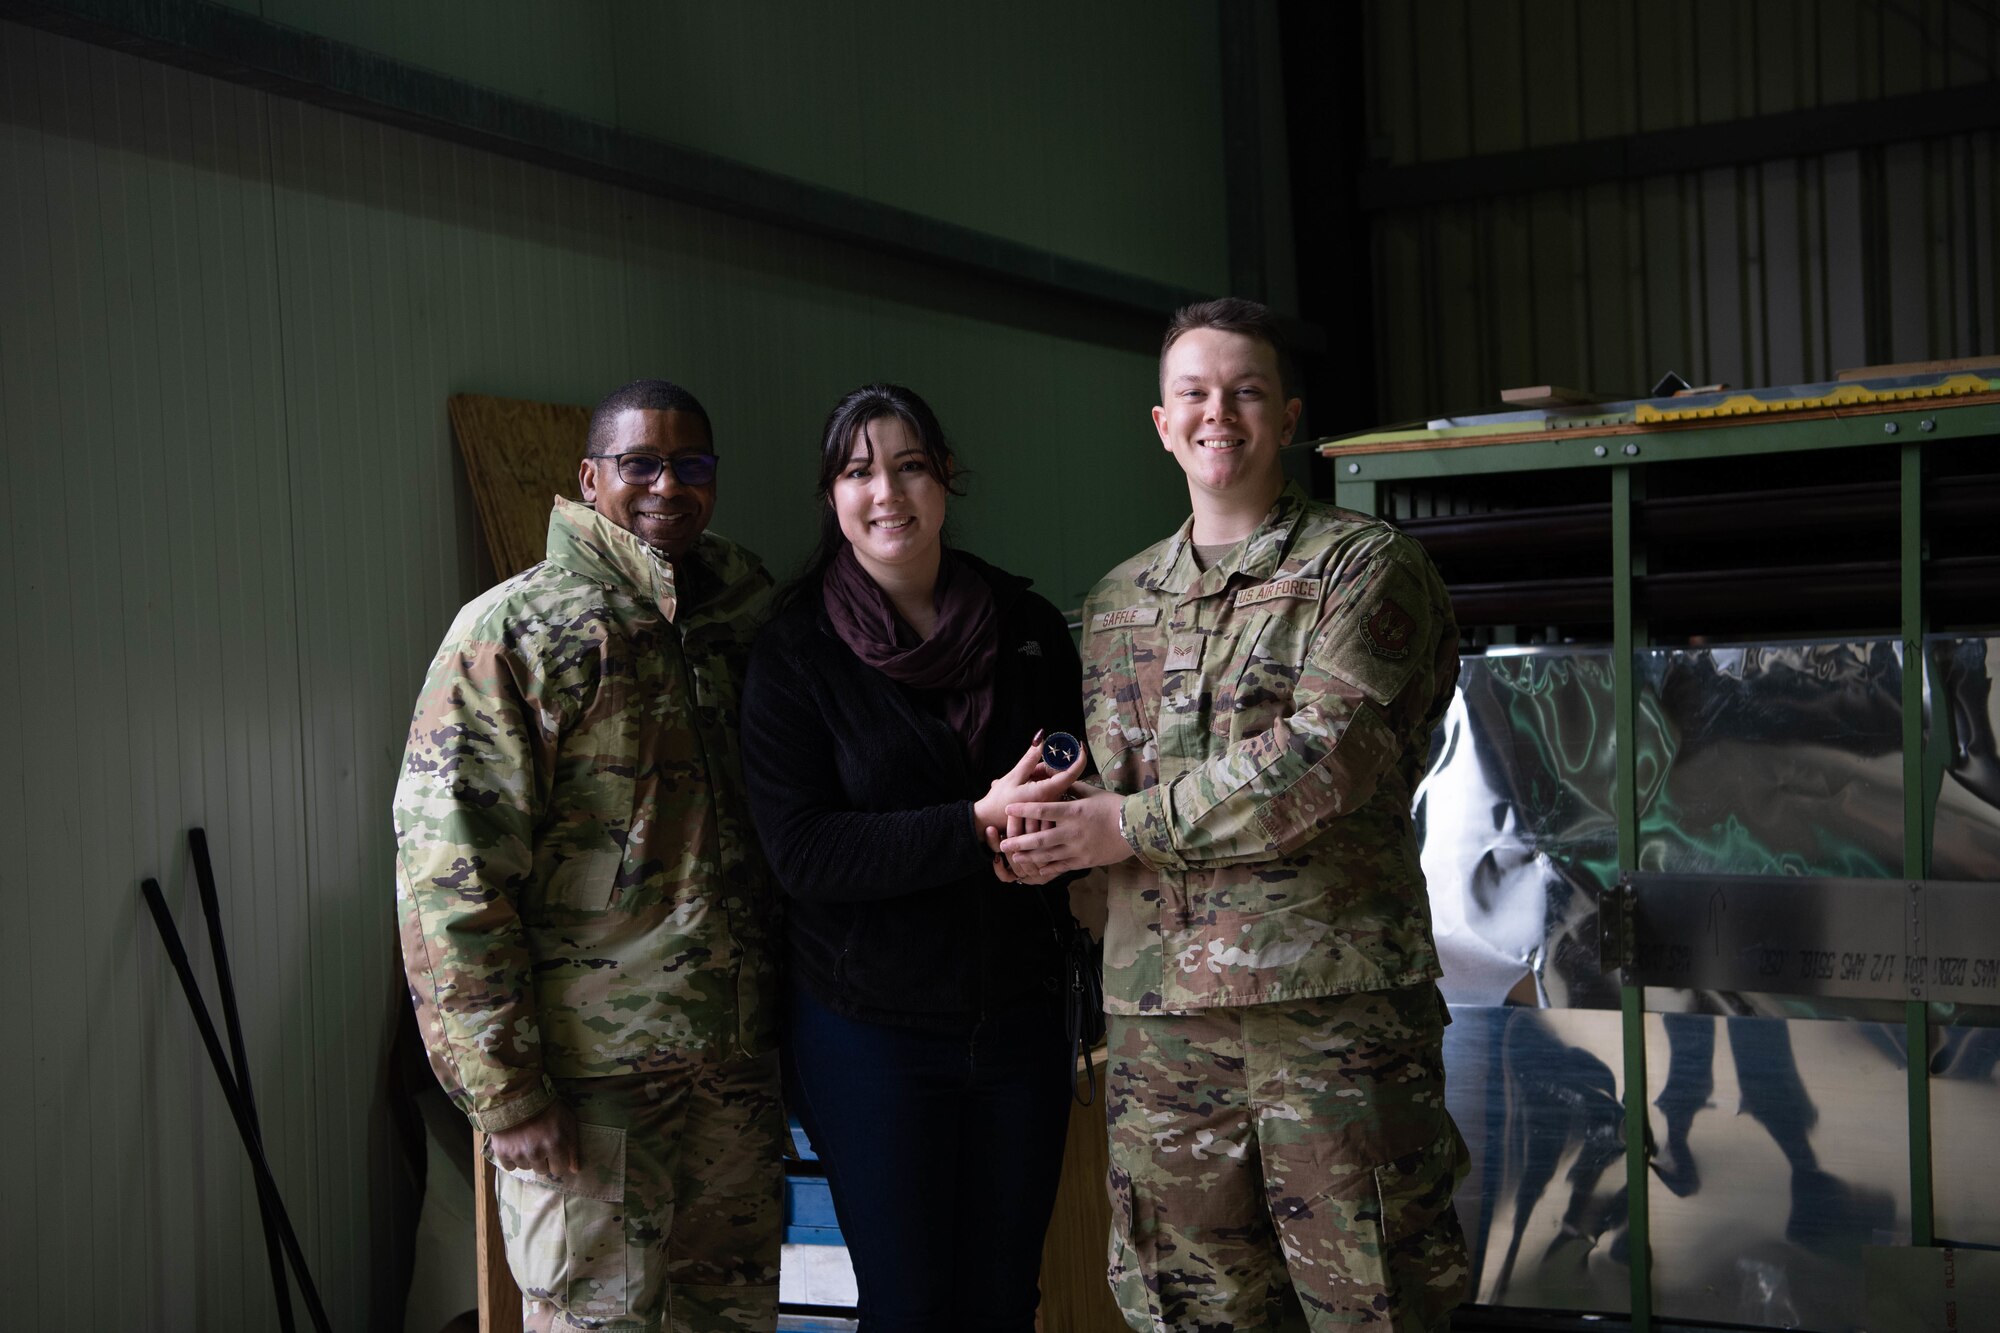 Airmen and a spouse pose for photo